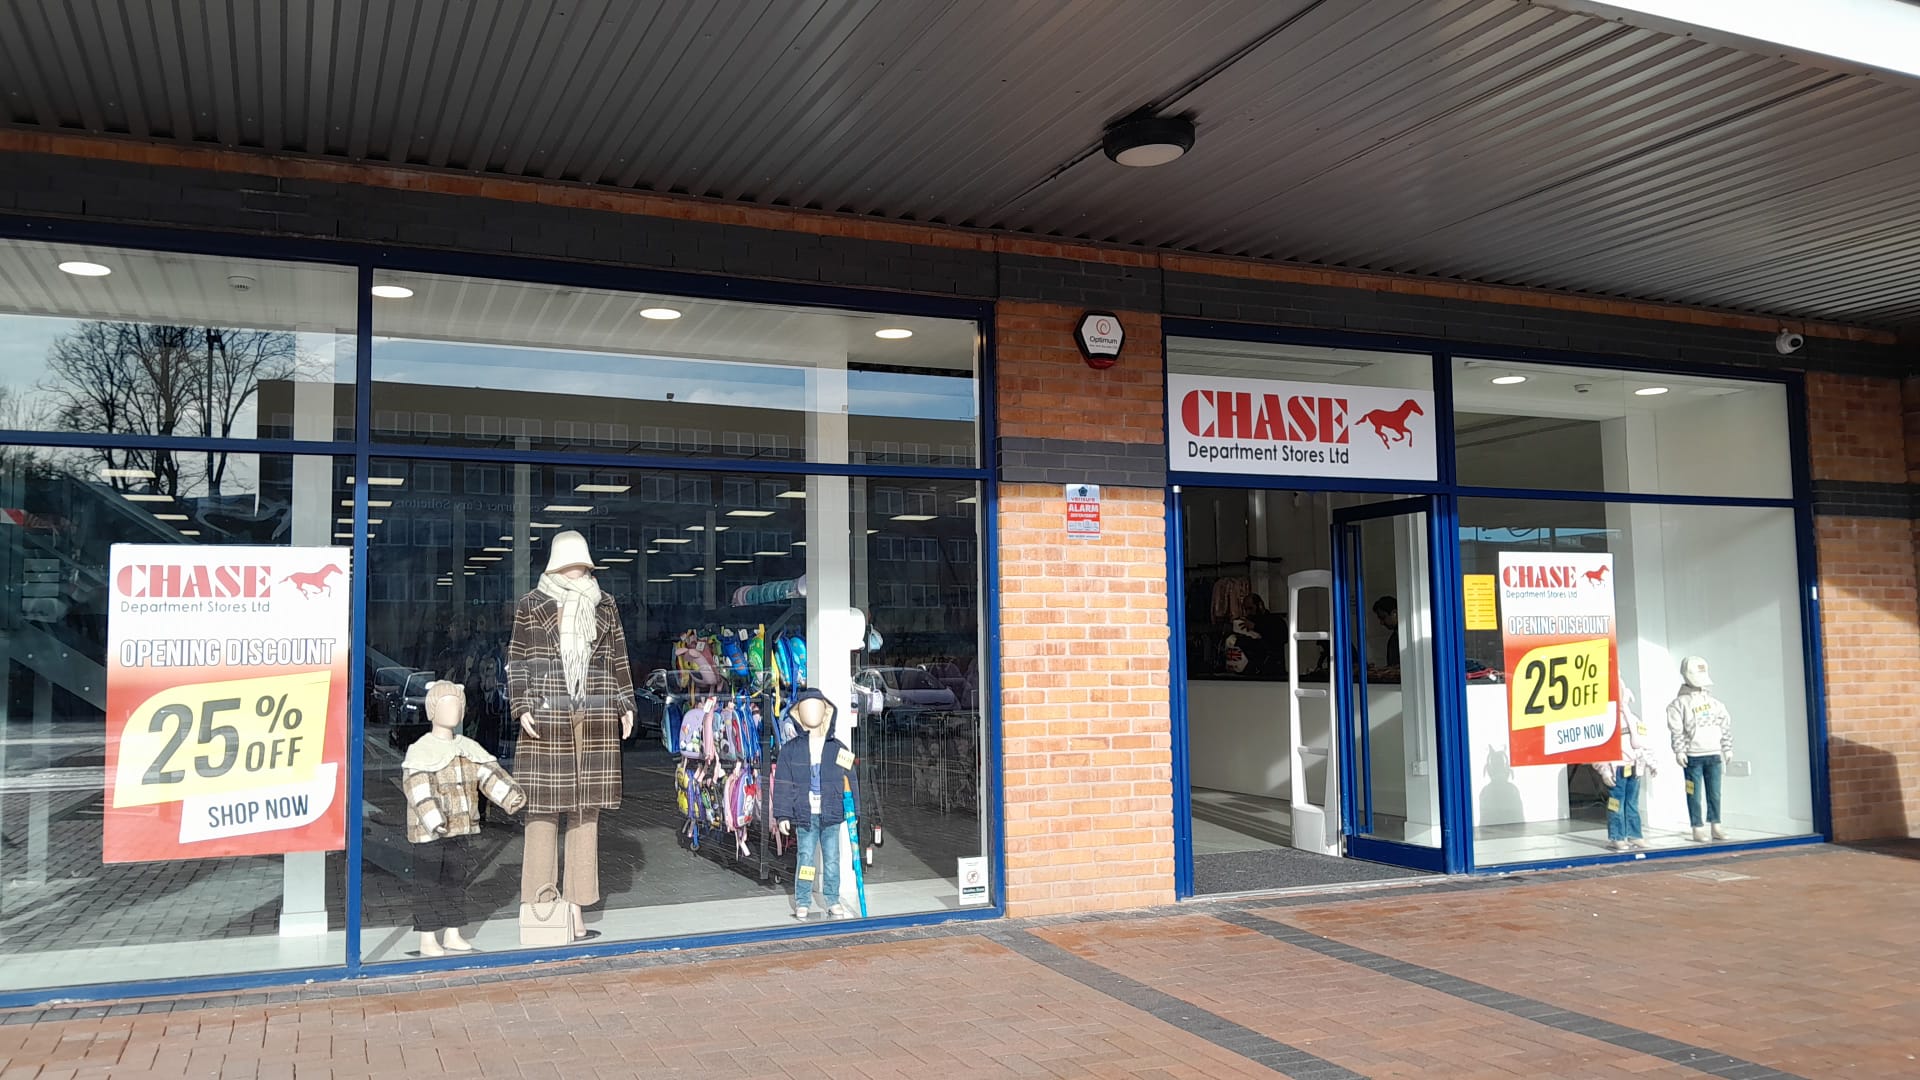 Chase Department Store located on Astle Retail Park have received their welcome pack today